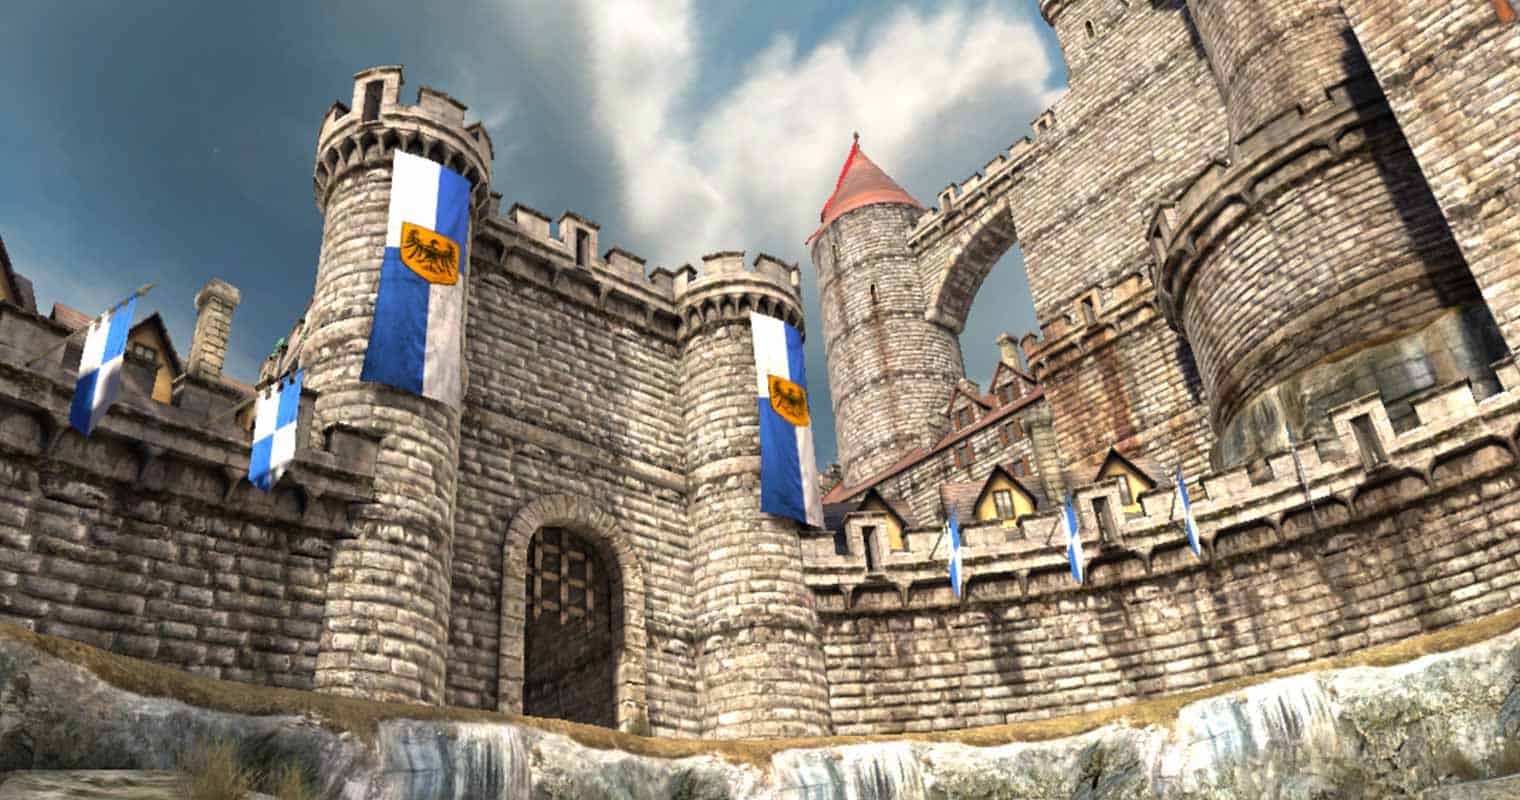 Screenshot of a medieval castle with banners flying on the sides.